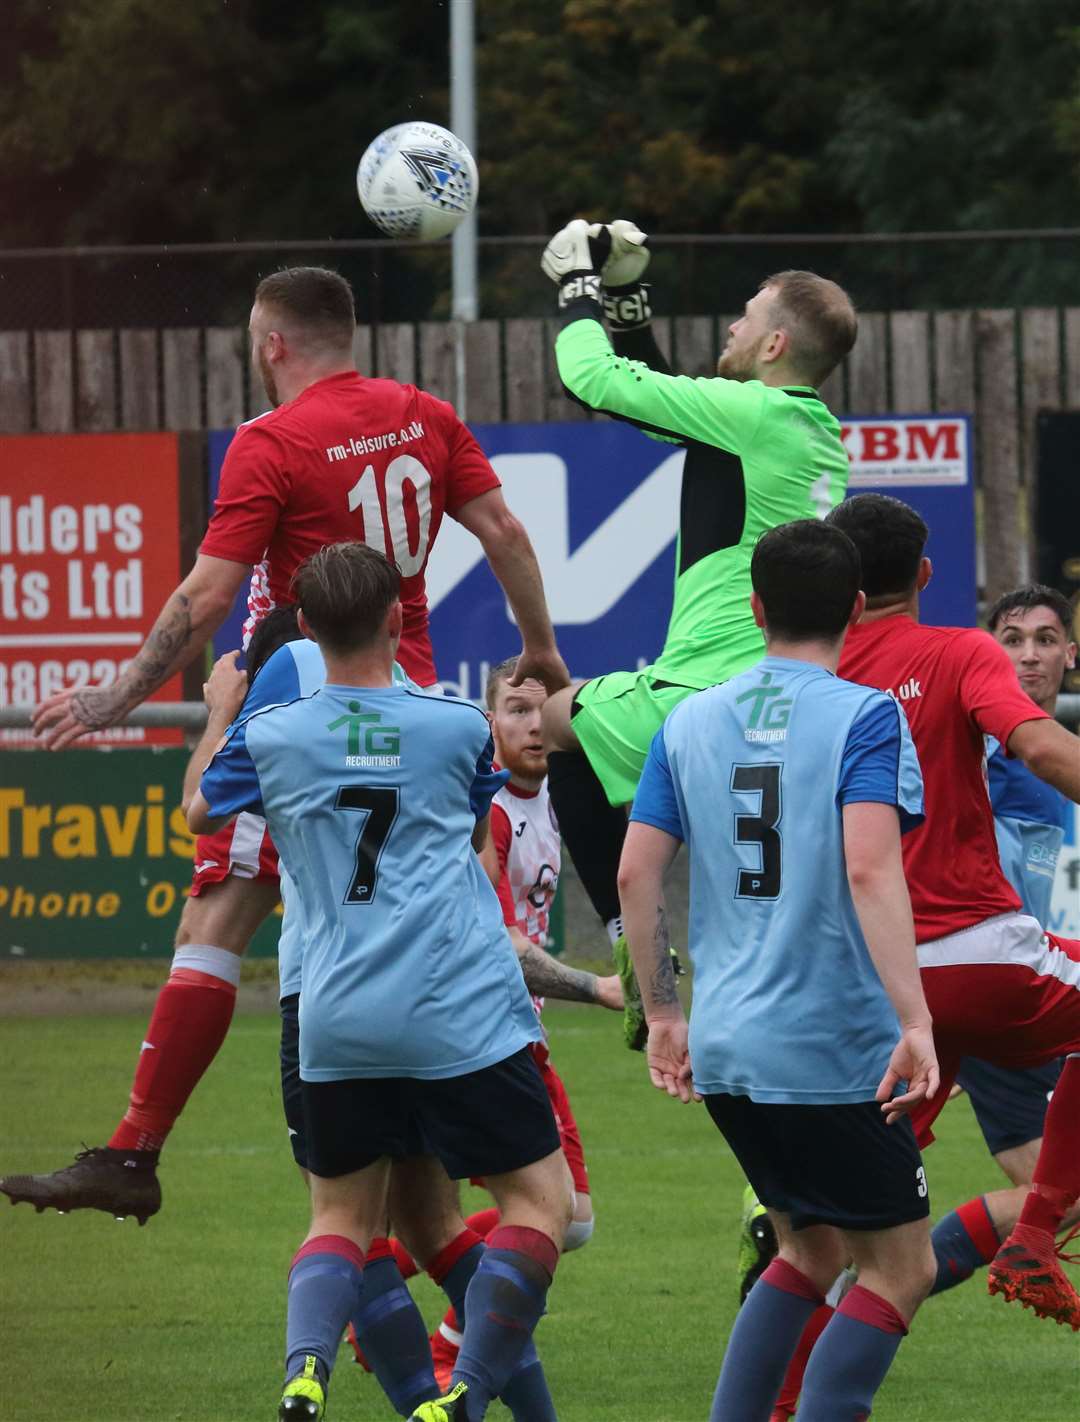 United captain Fraser Hobday clears one in the box.